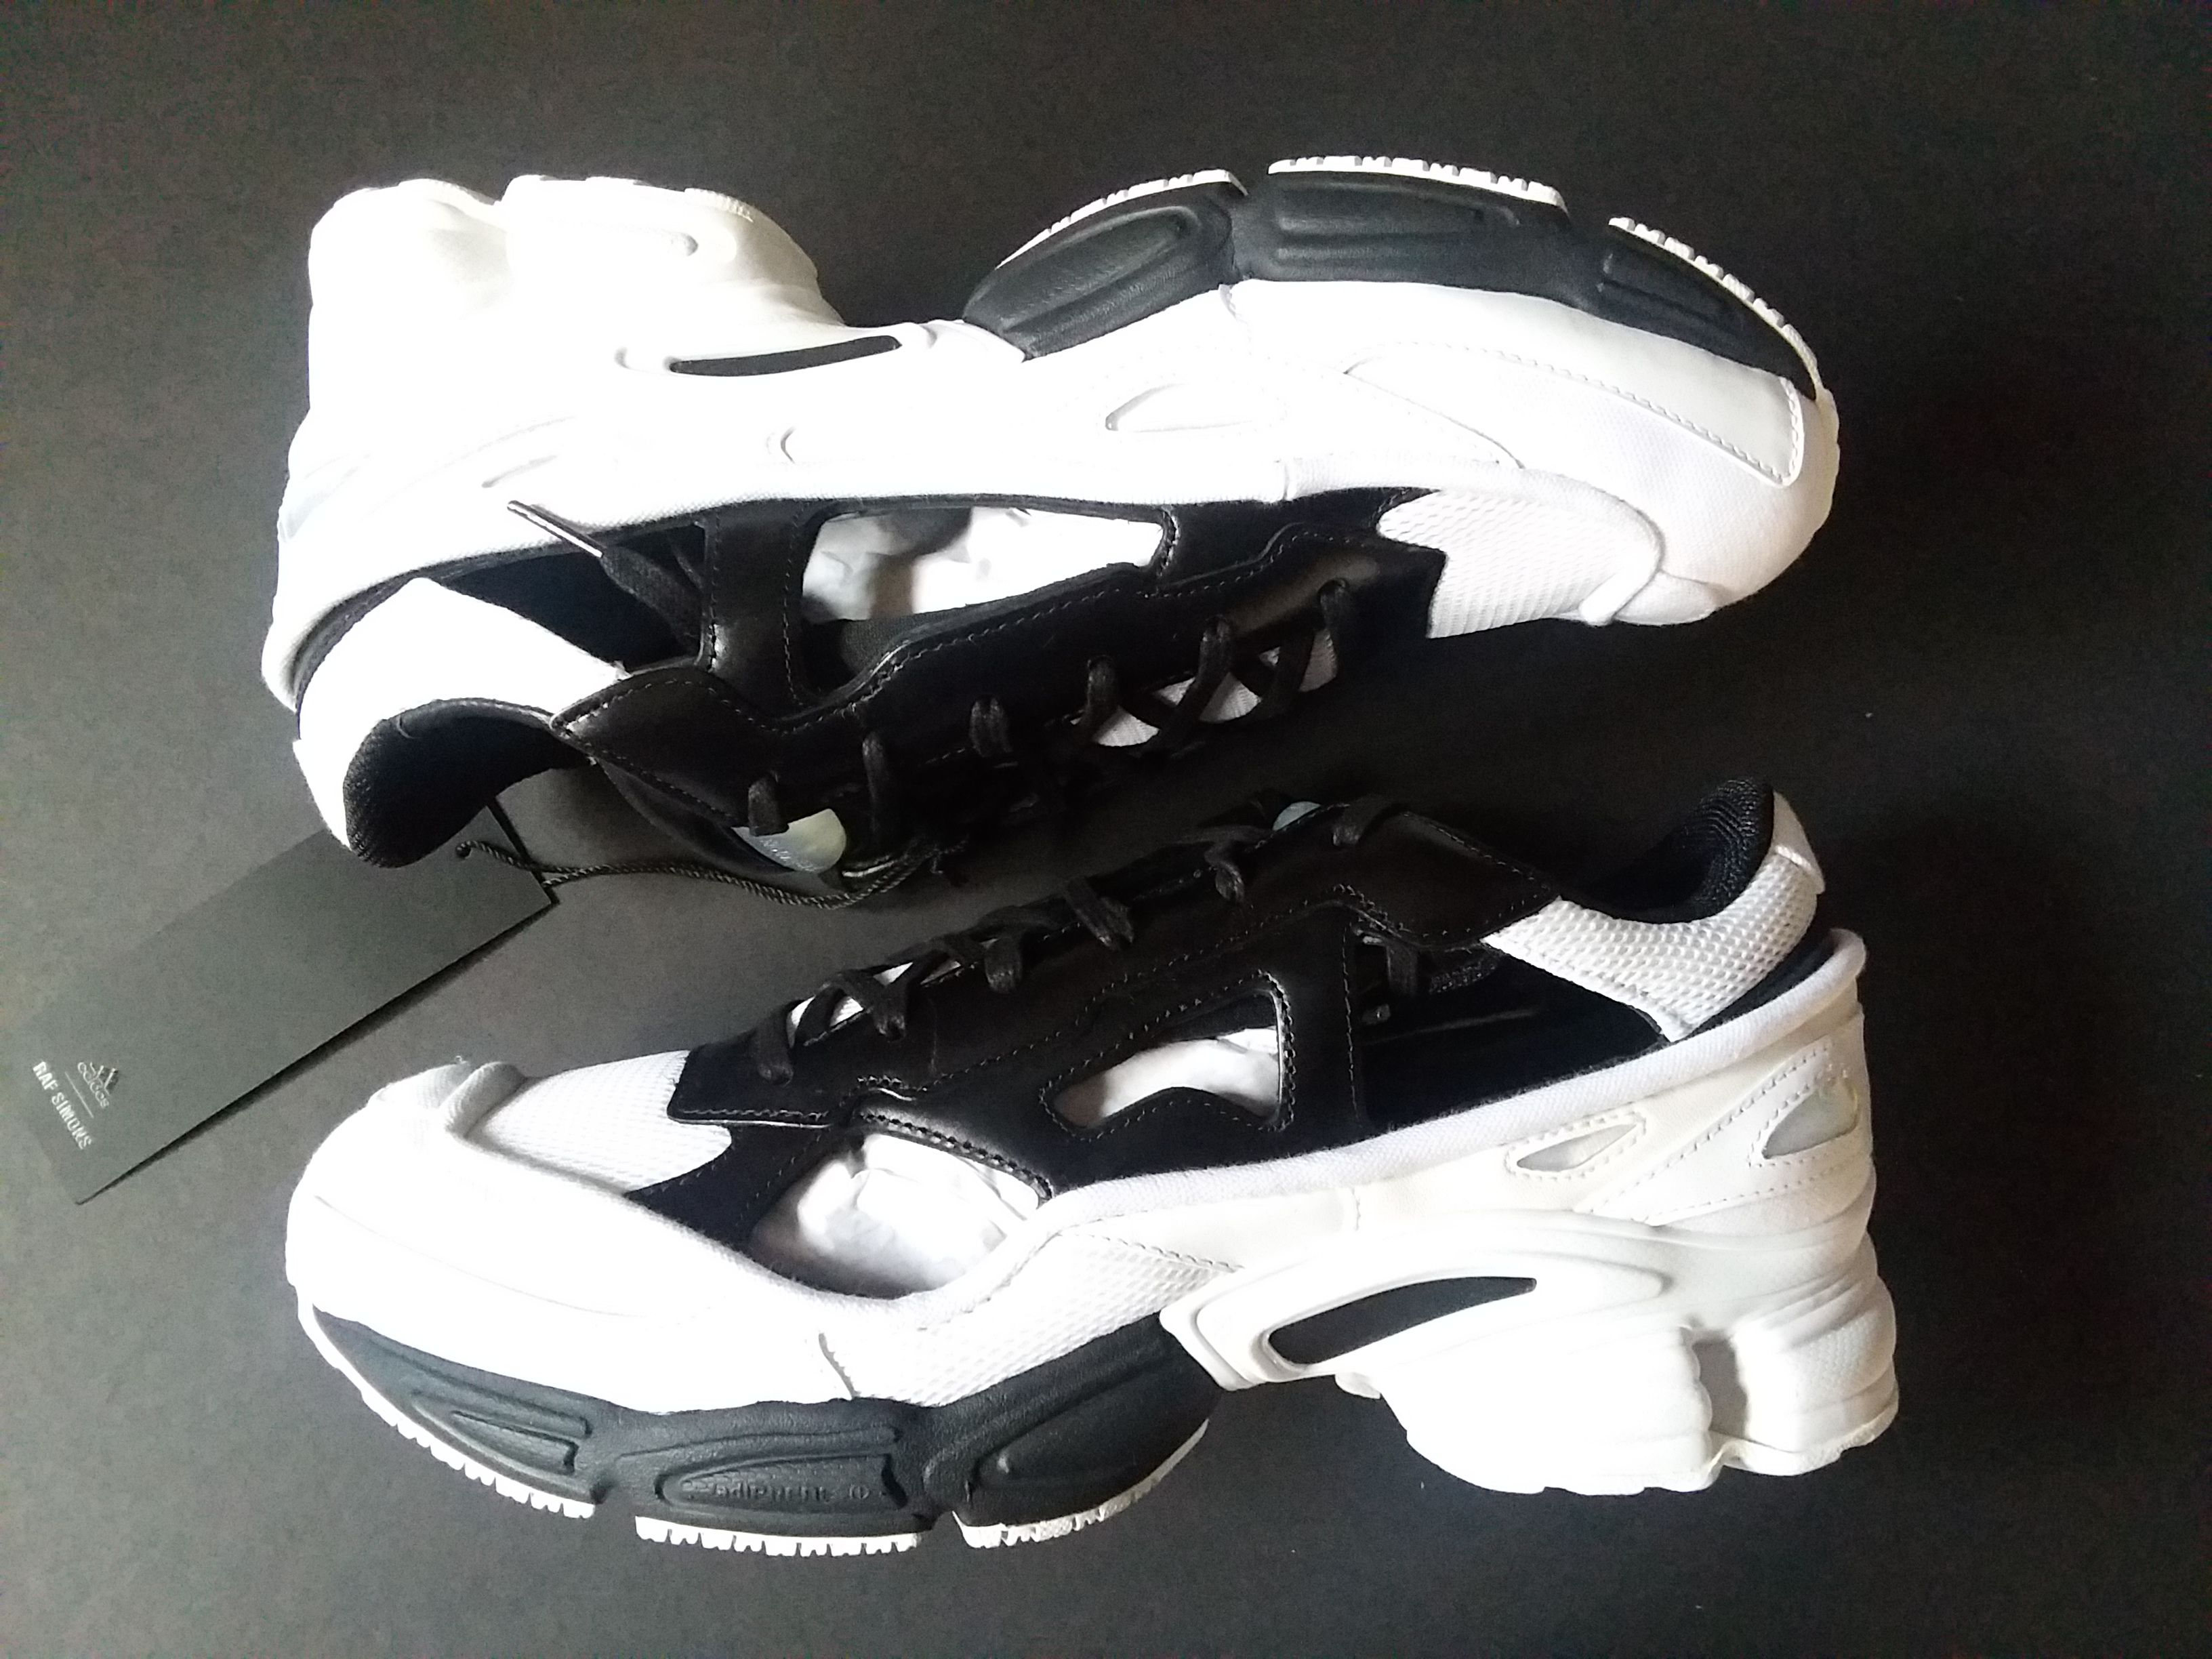 Adidas Raf Simons Dad Shoes for Sale in Ontario, CA - OfferUp